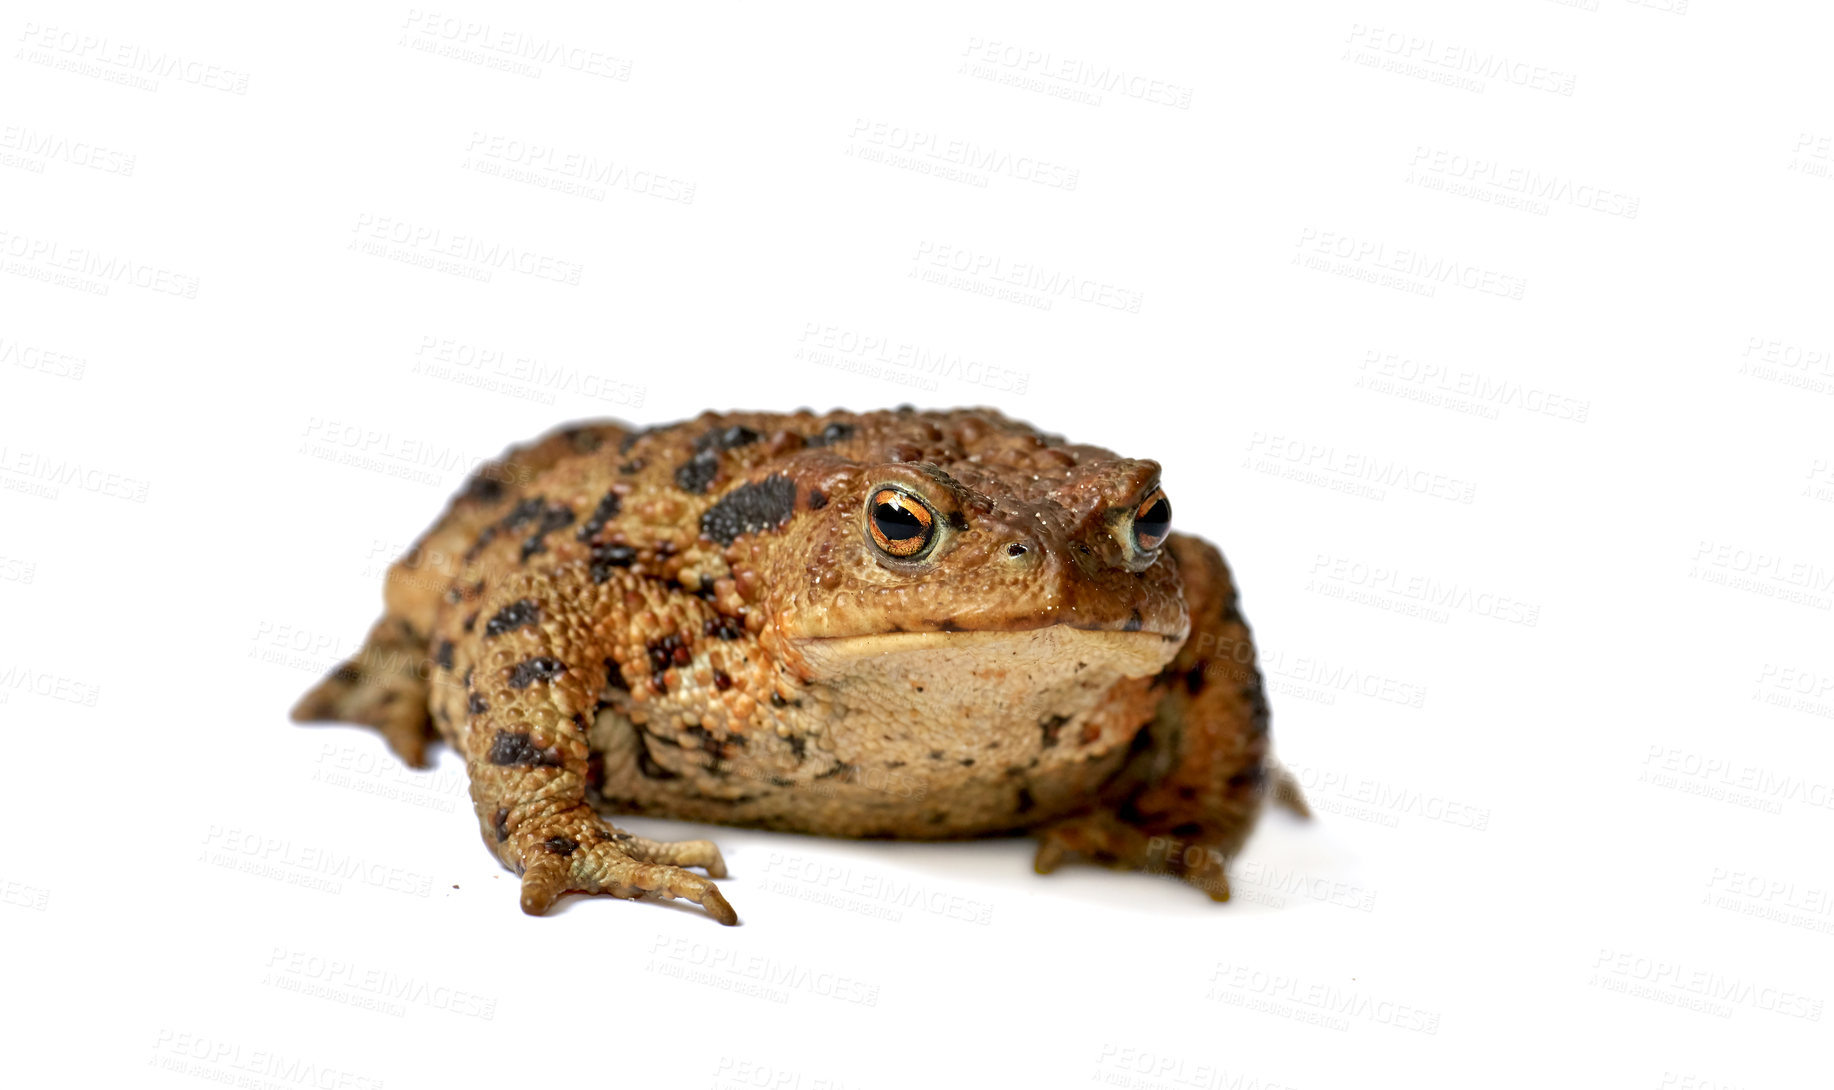 Buy stock photo Common true toad or frog with brown body and black dot markings on dry rough skin isolated on a white background with copyspace. Amphibian from the bufonidae species ready to hop around and croak 